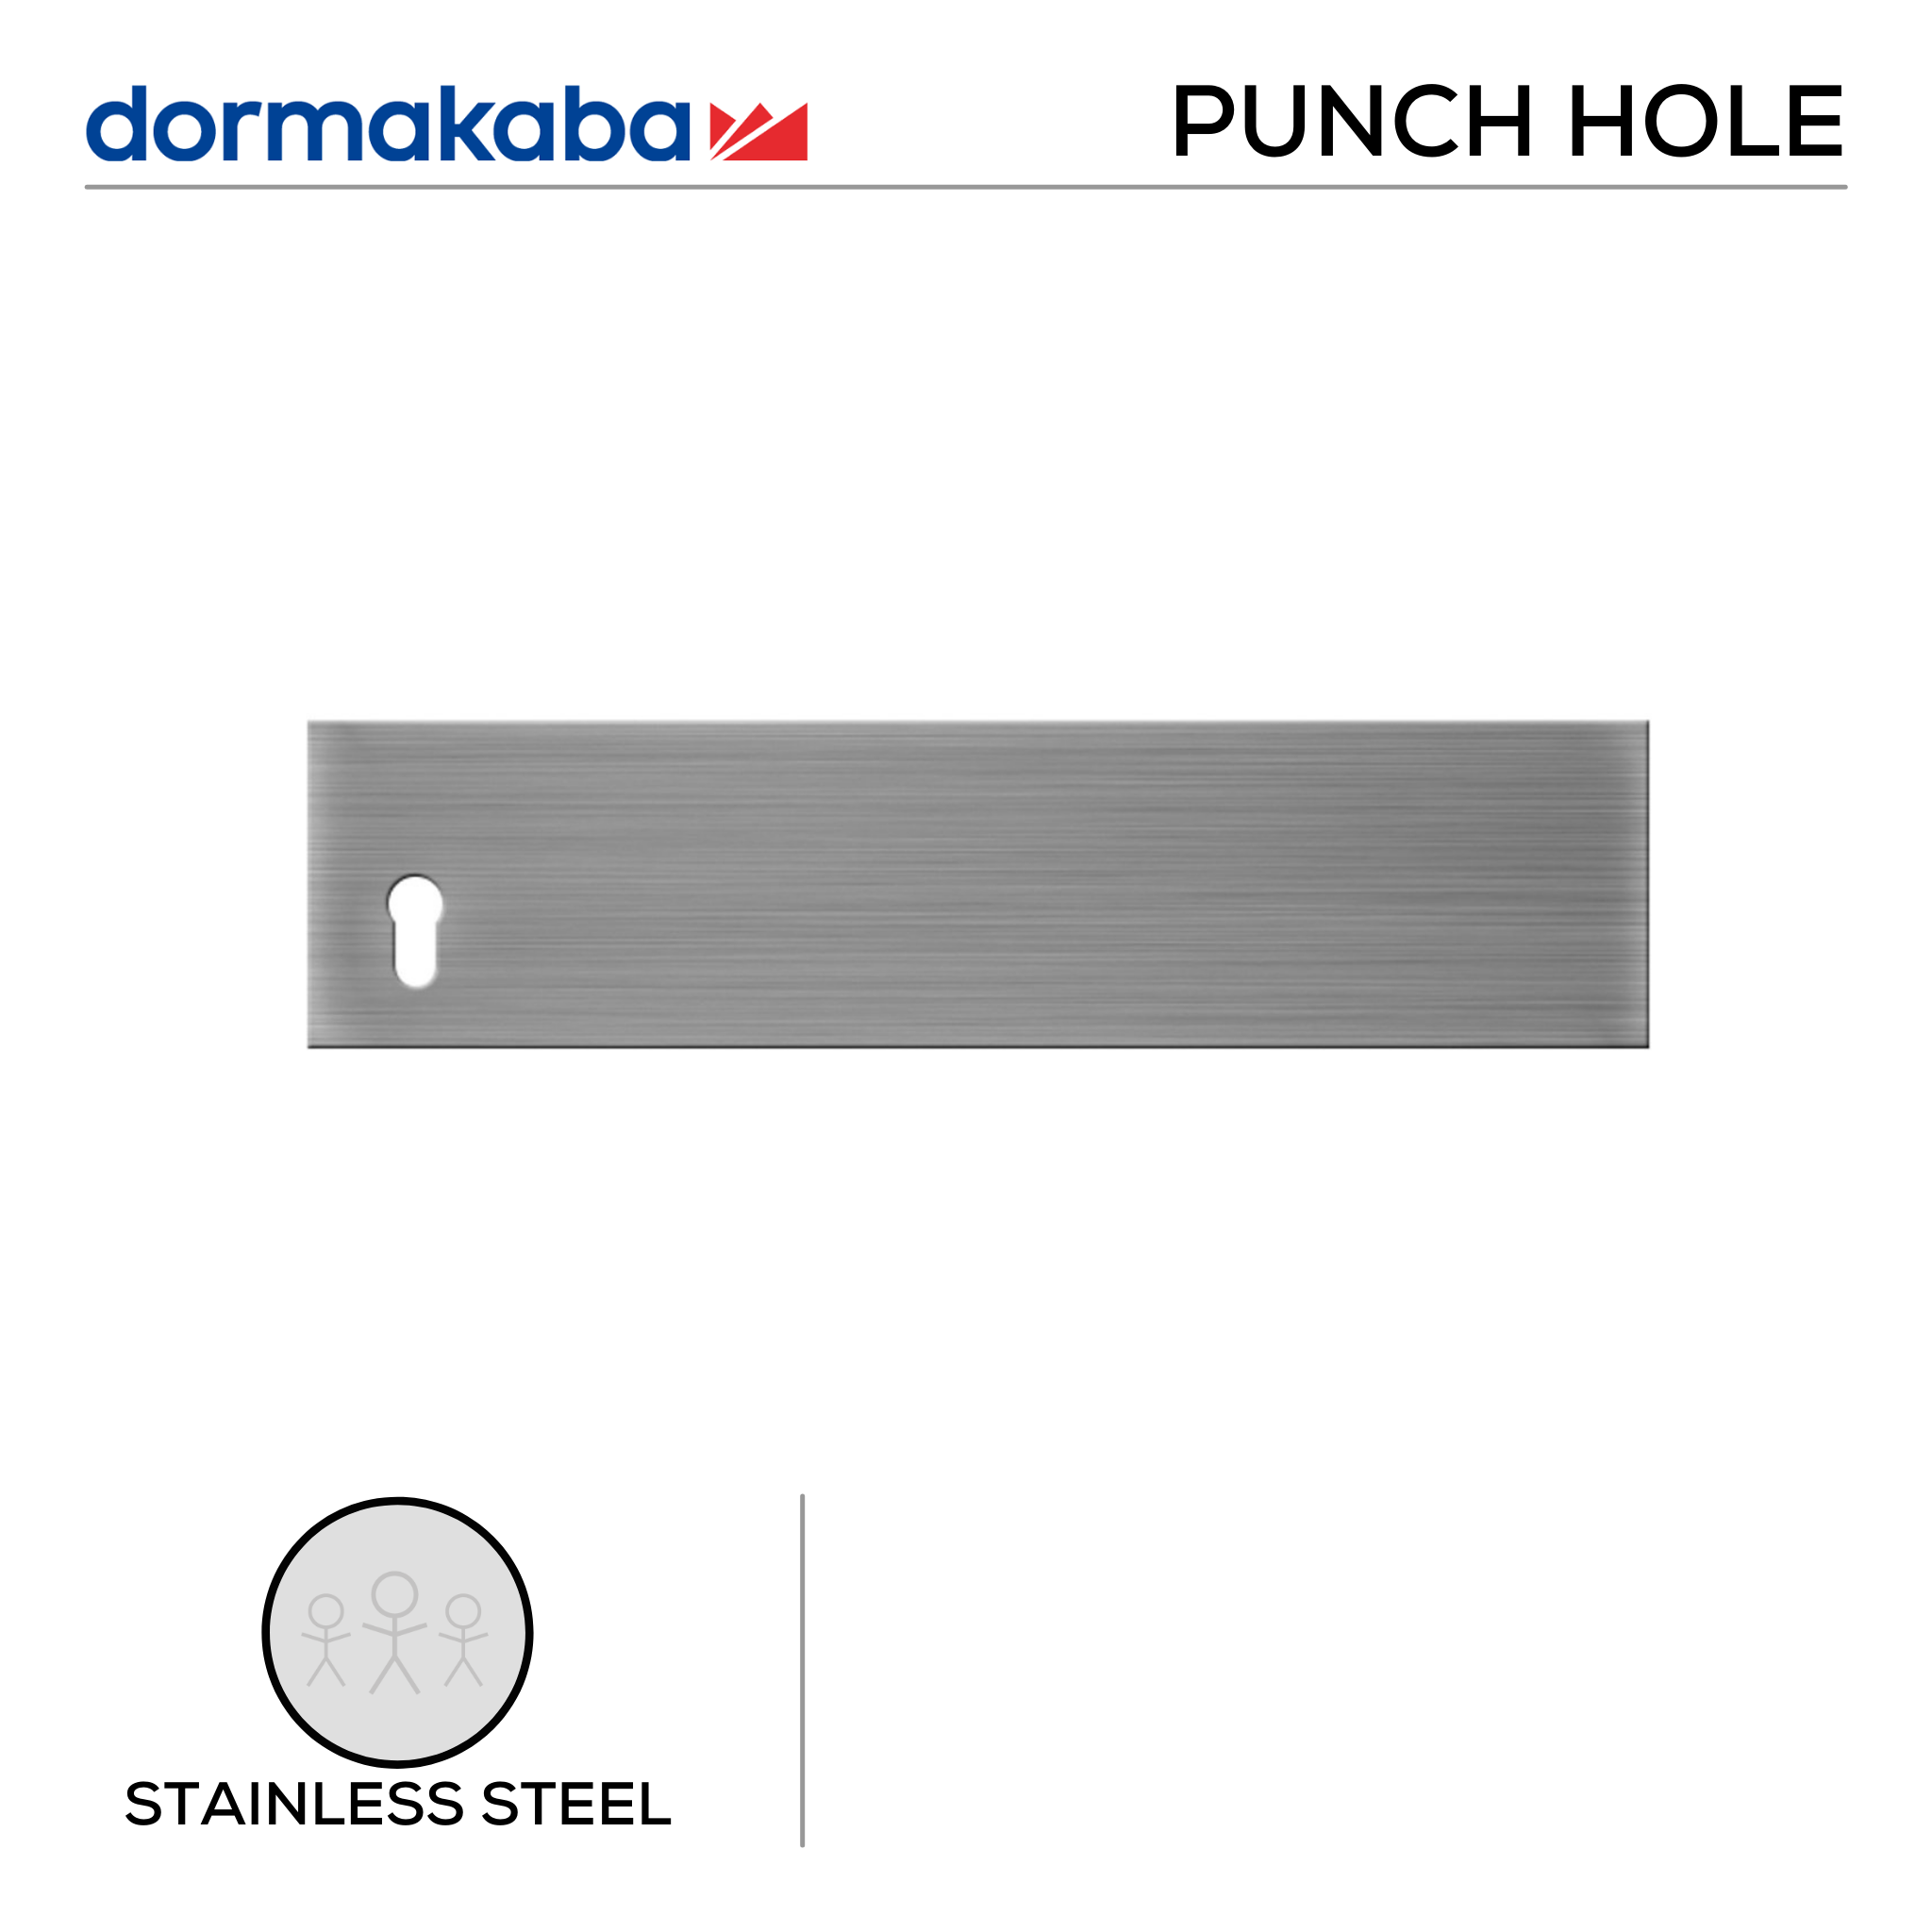 Punch Hole (DKP-SS-166), Cylinder Punch Hole, Brushed Stainless Steel, DORMAKABA